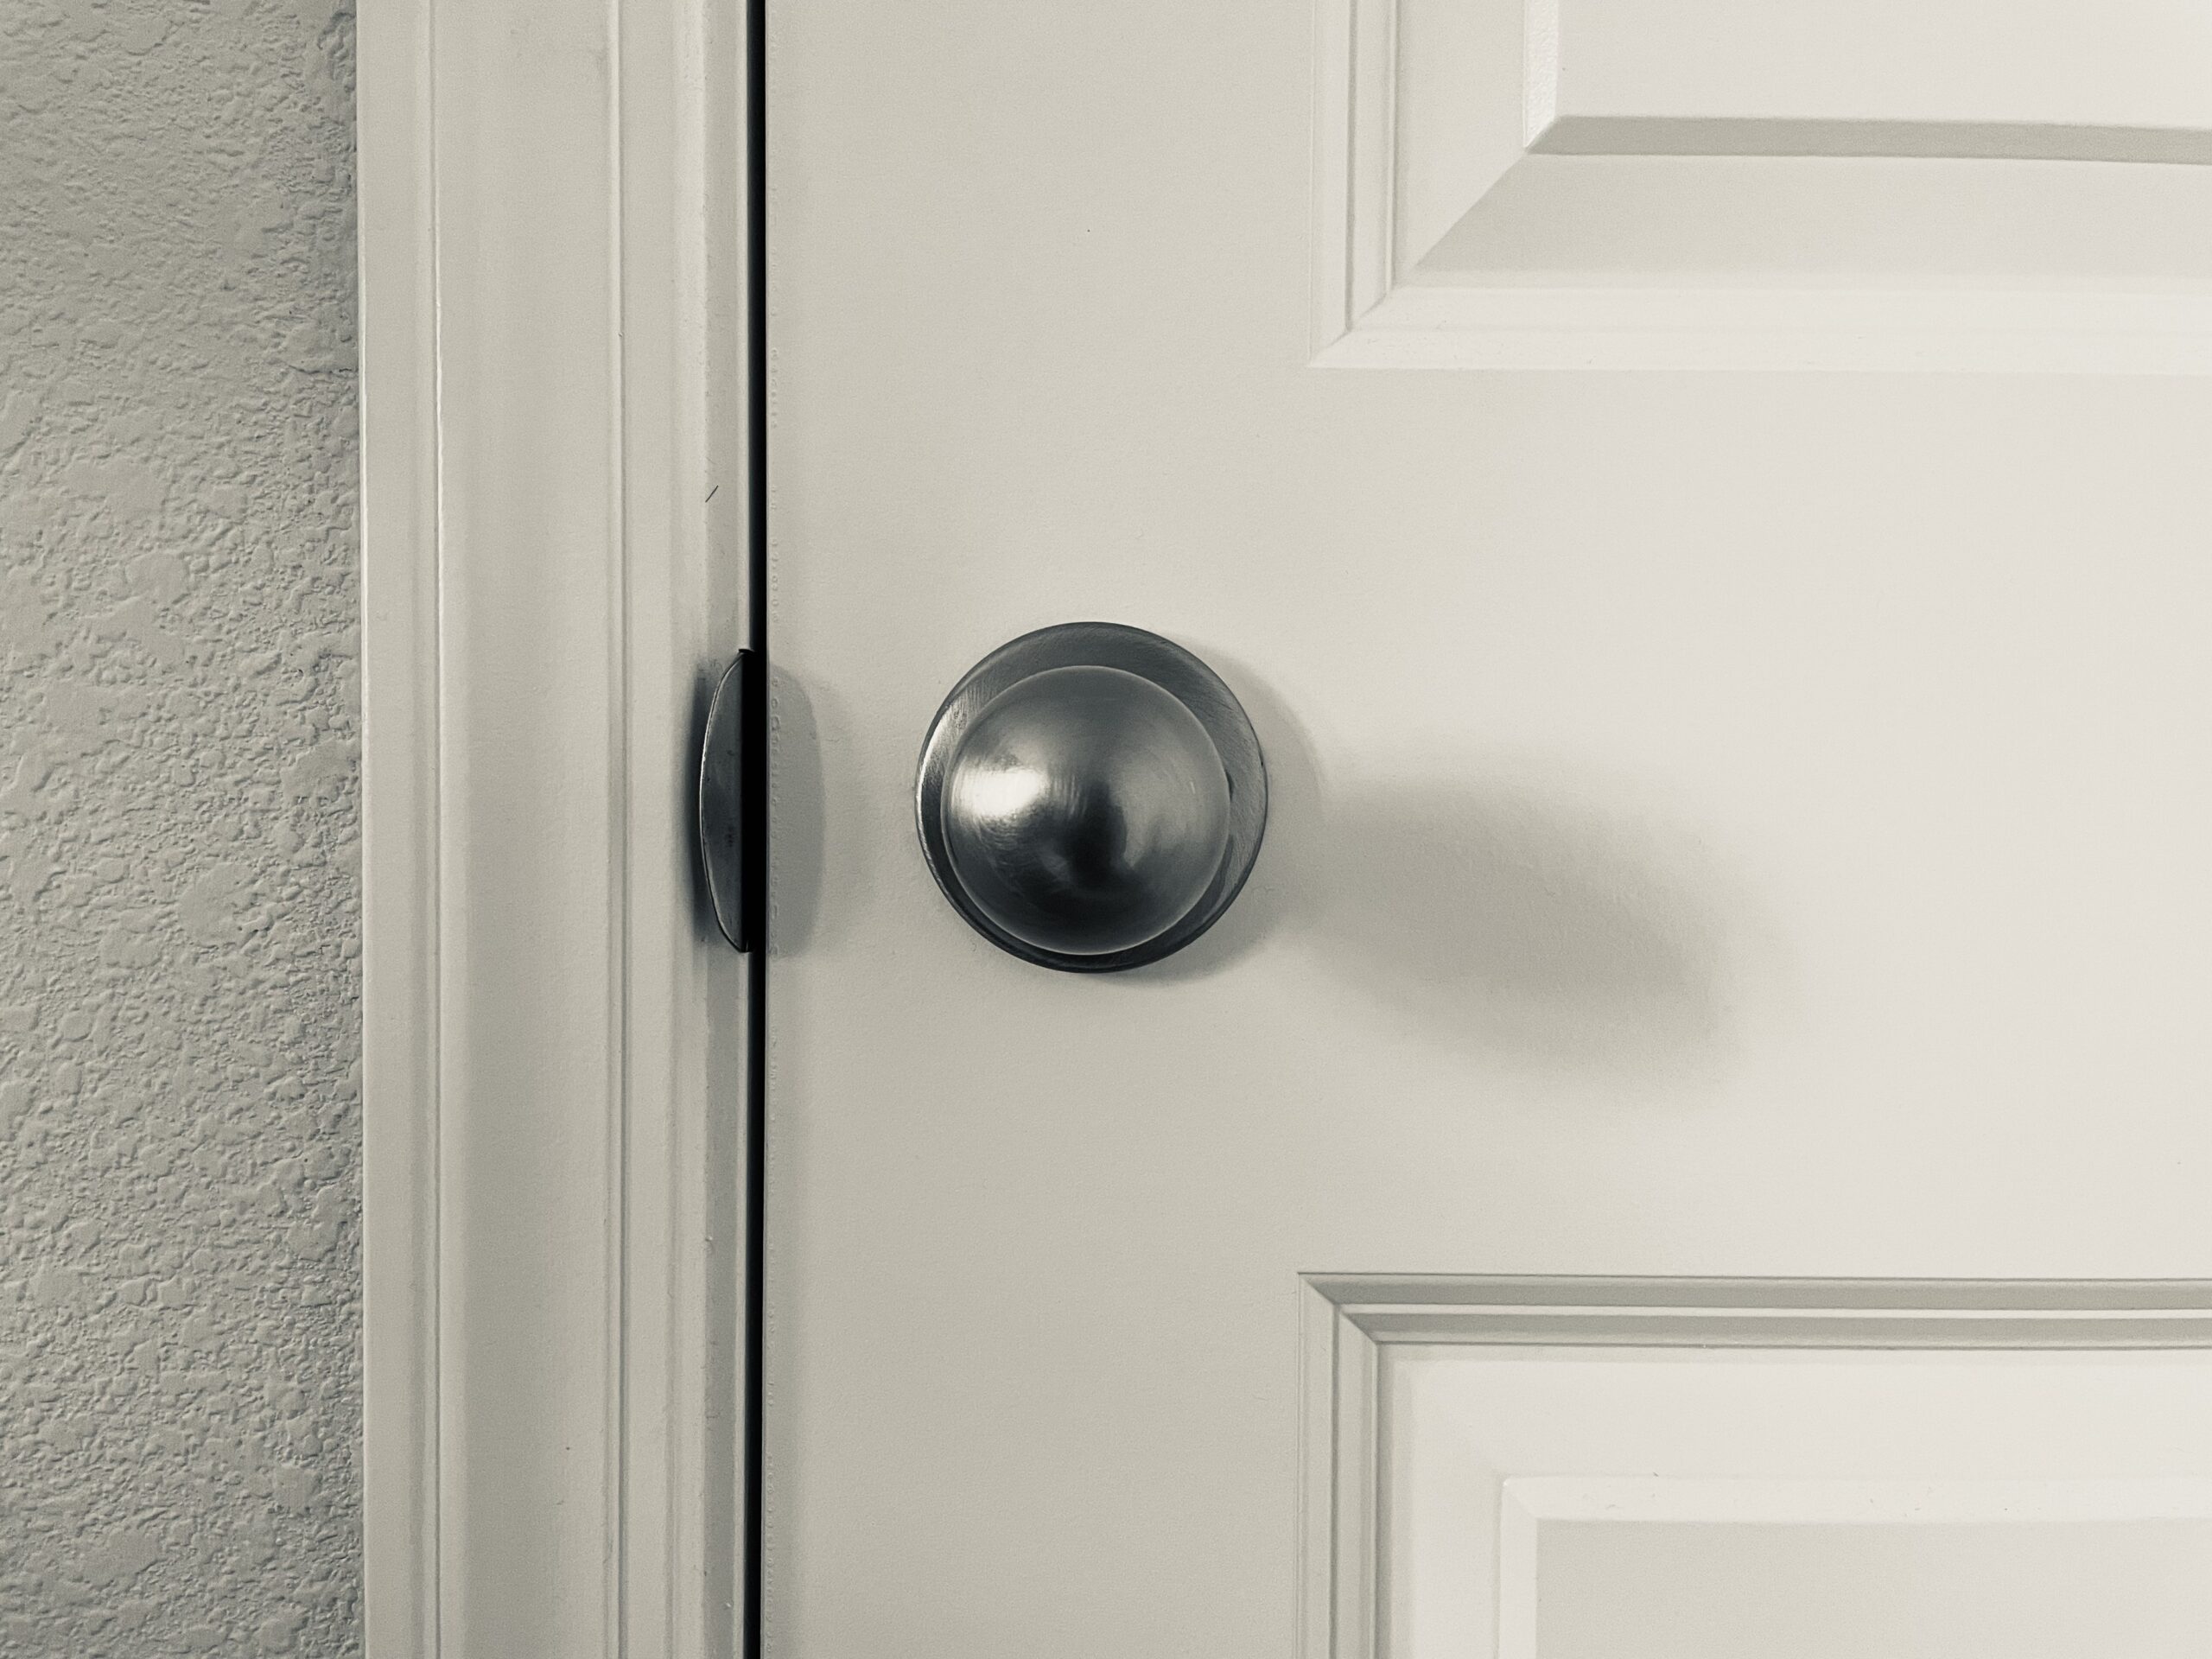 How Safe Is Your Hotel Room Door? How To Double-secure It